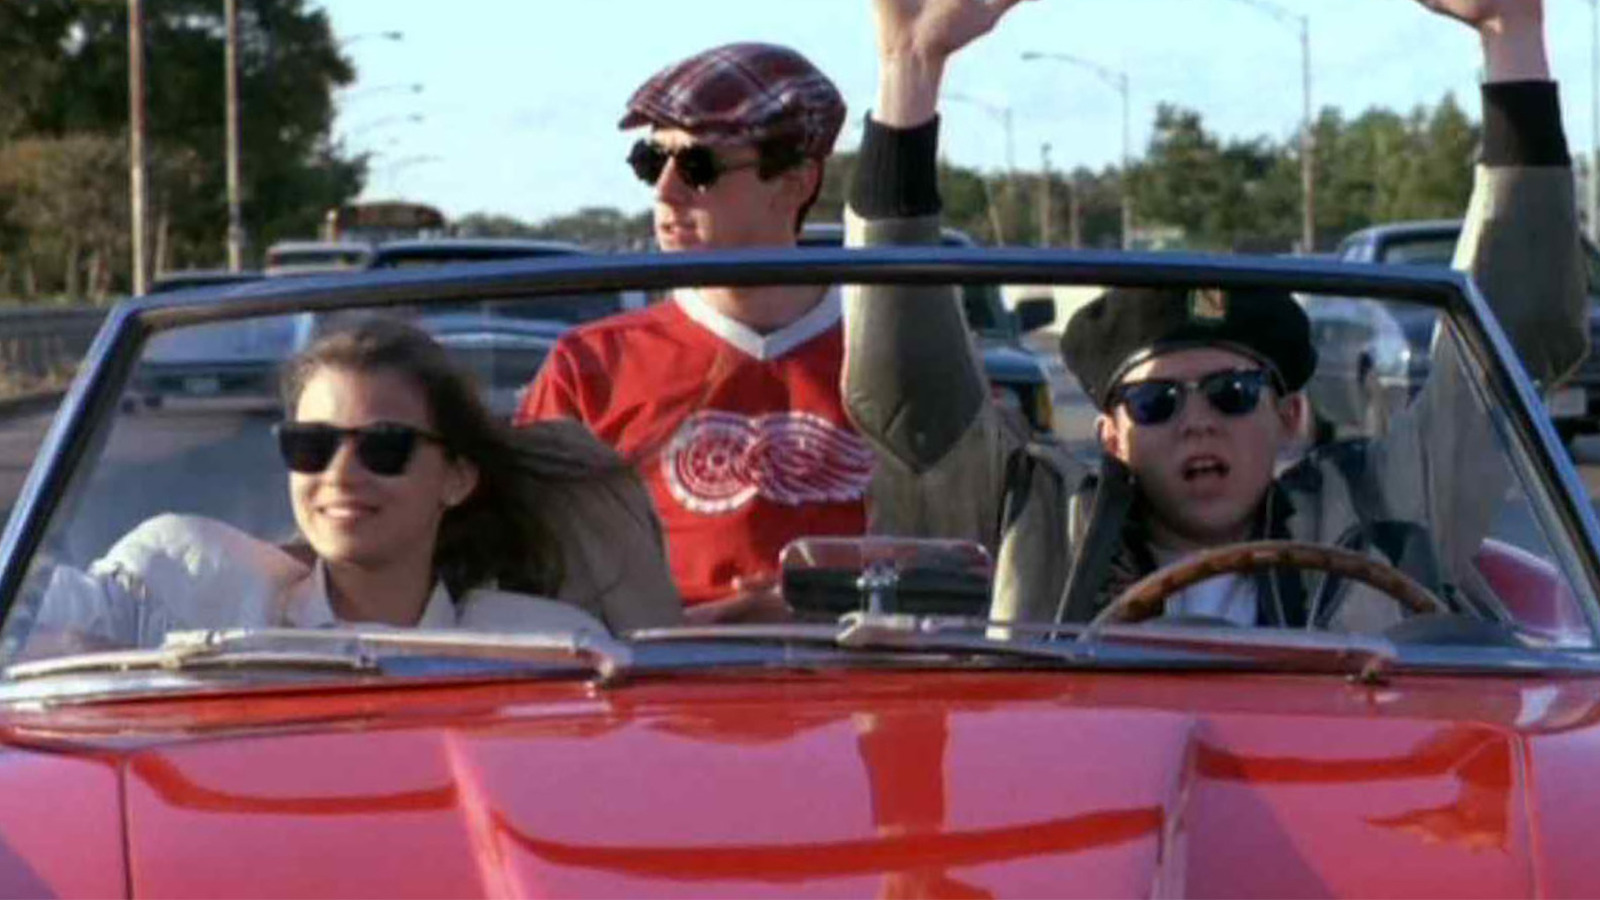 Ferris Bueller's Day Off: Why this '80s teen movie is still a